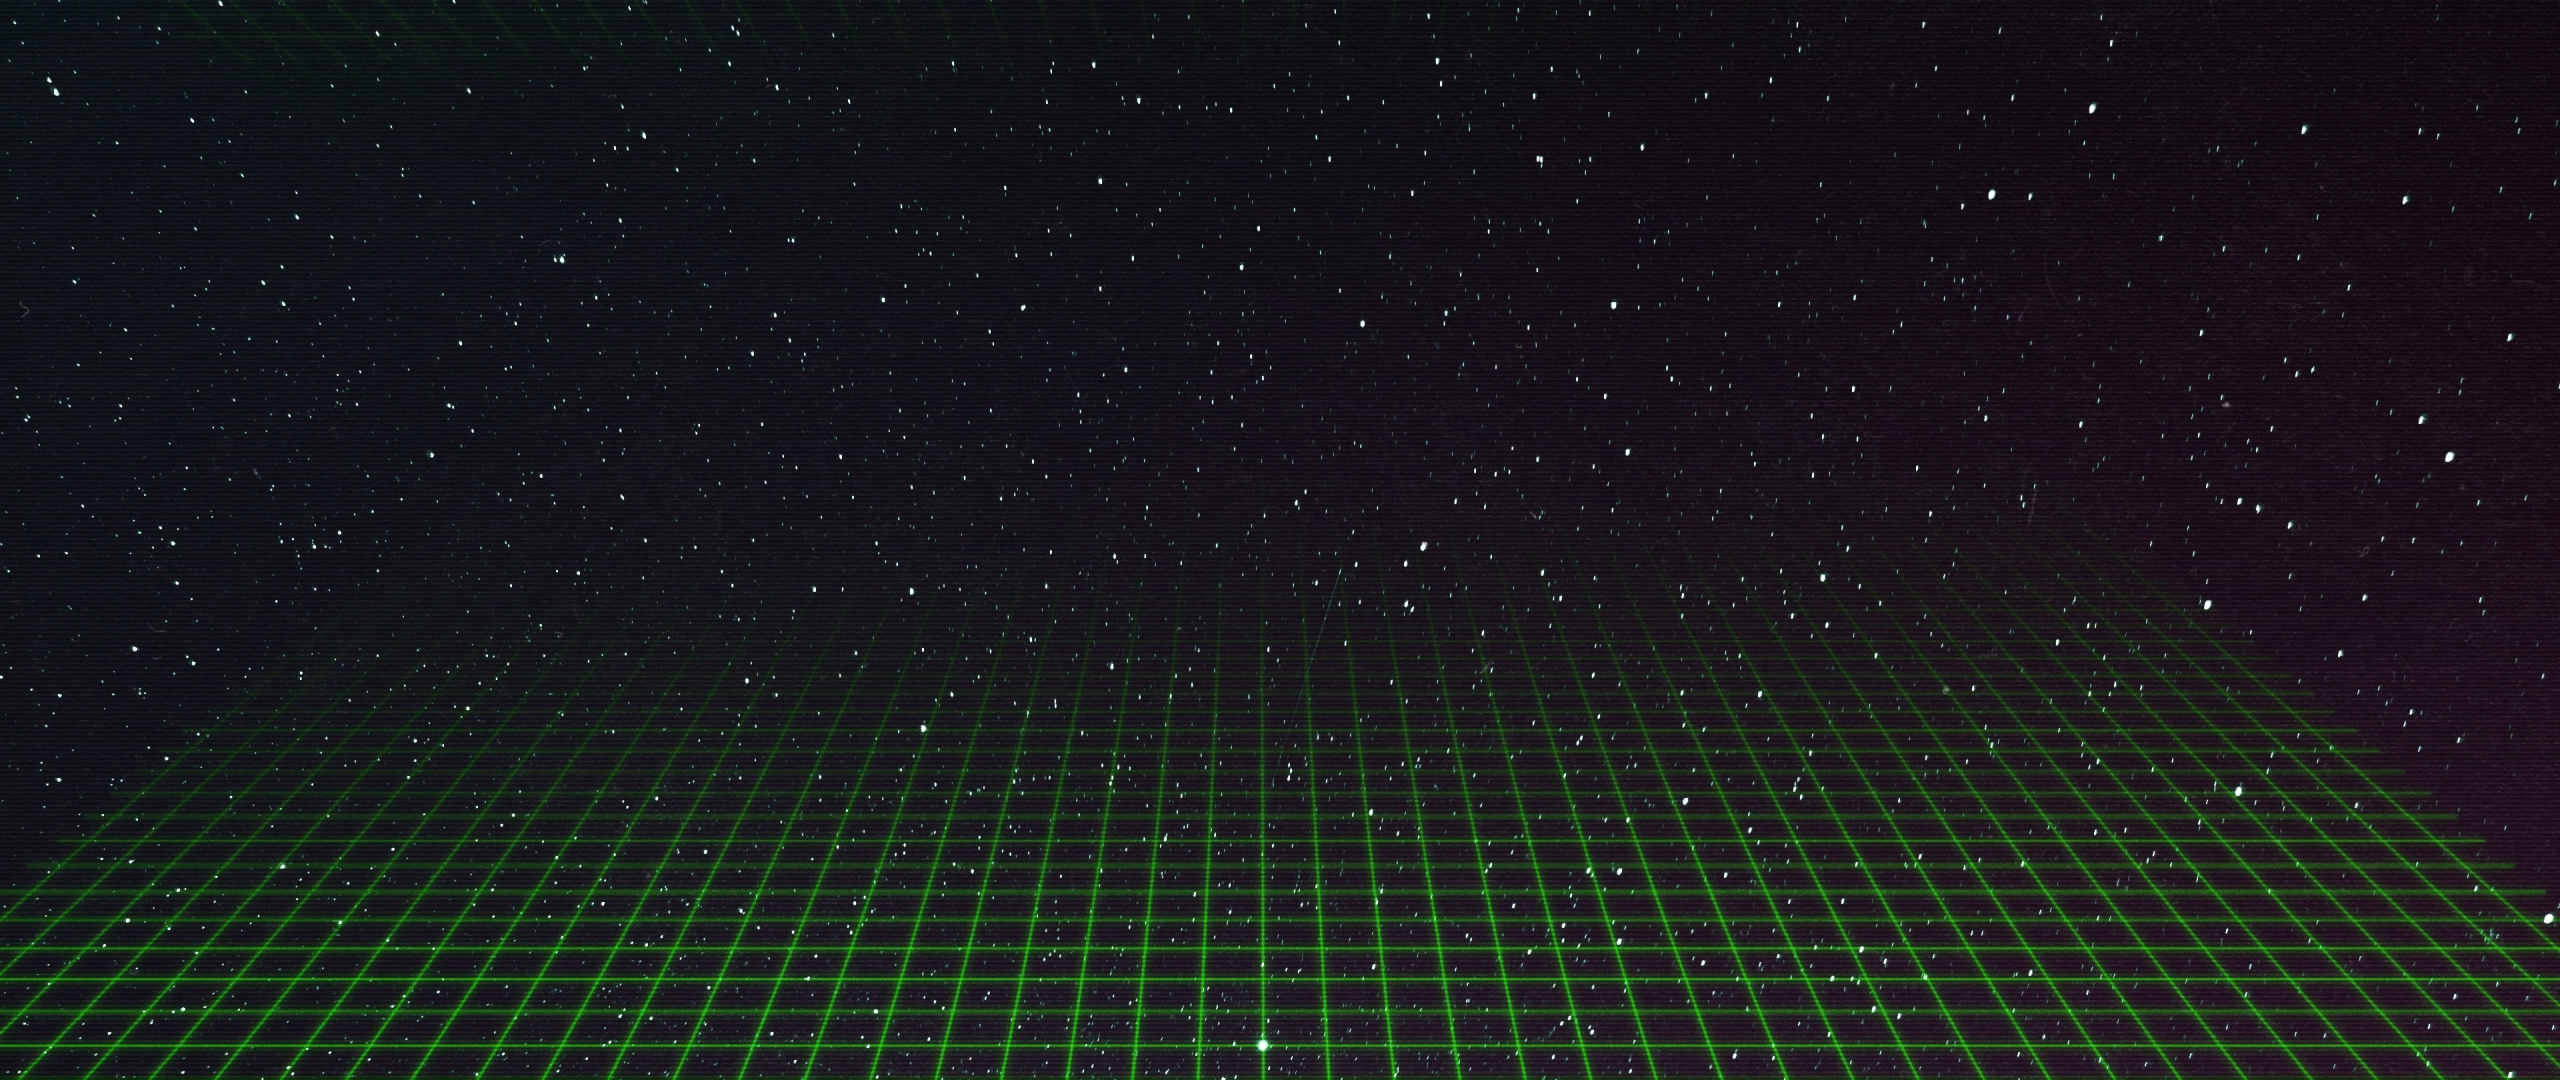 Download synthwave, green grid, dark, space, art 2560x1080 wallpaper, dual wide 2560x1080 HD image, background, 18152